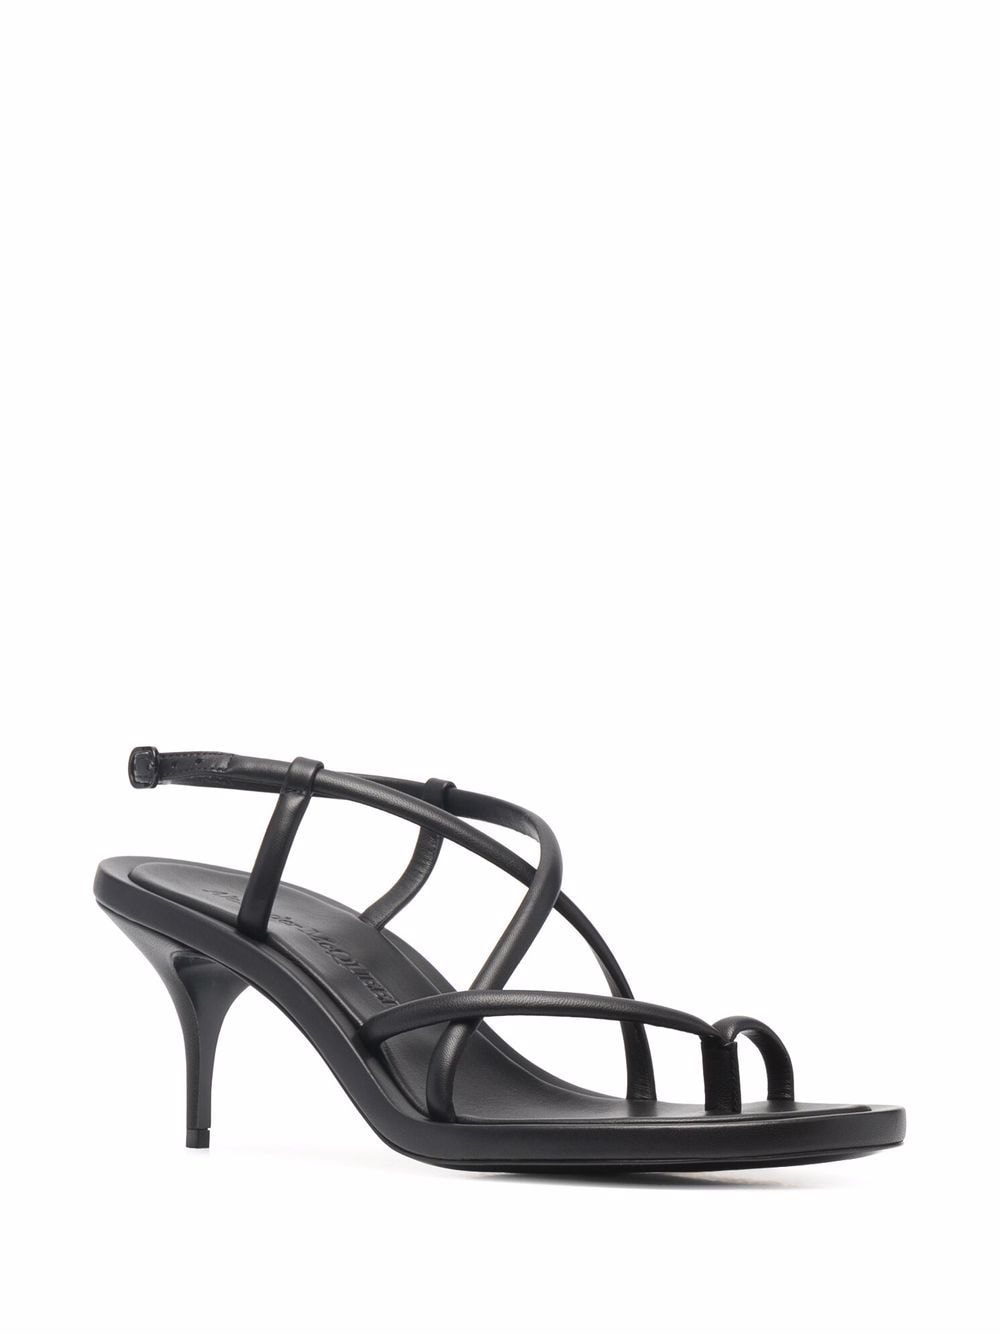 Image 2 of Alexander McQueen strappy leather sandals